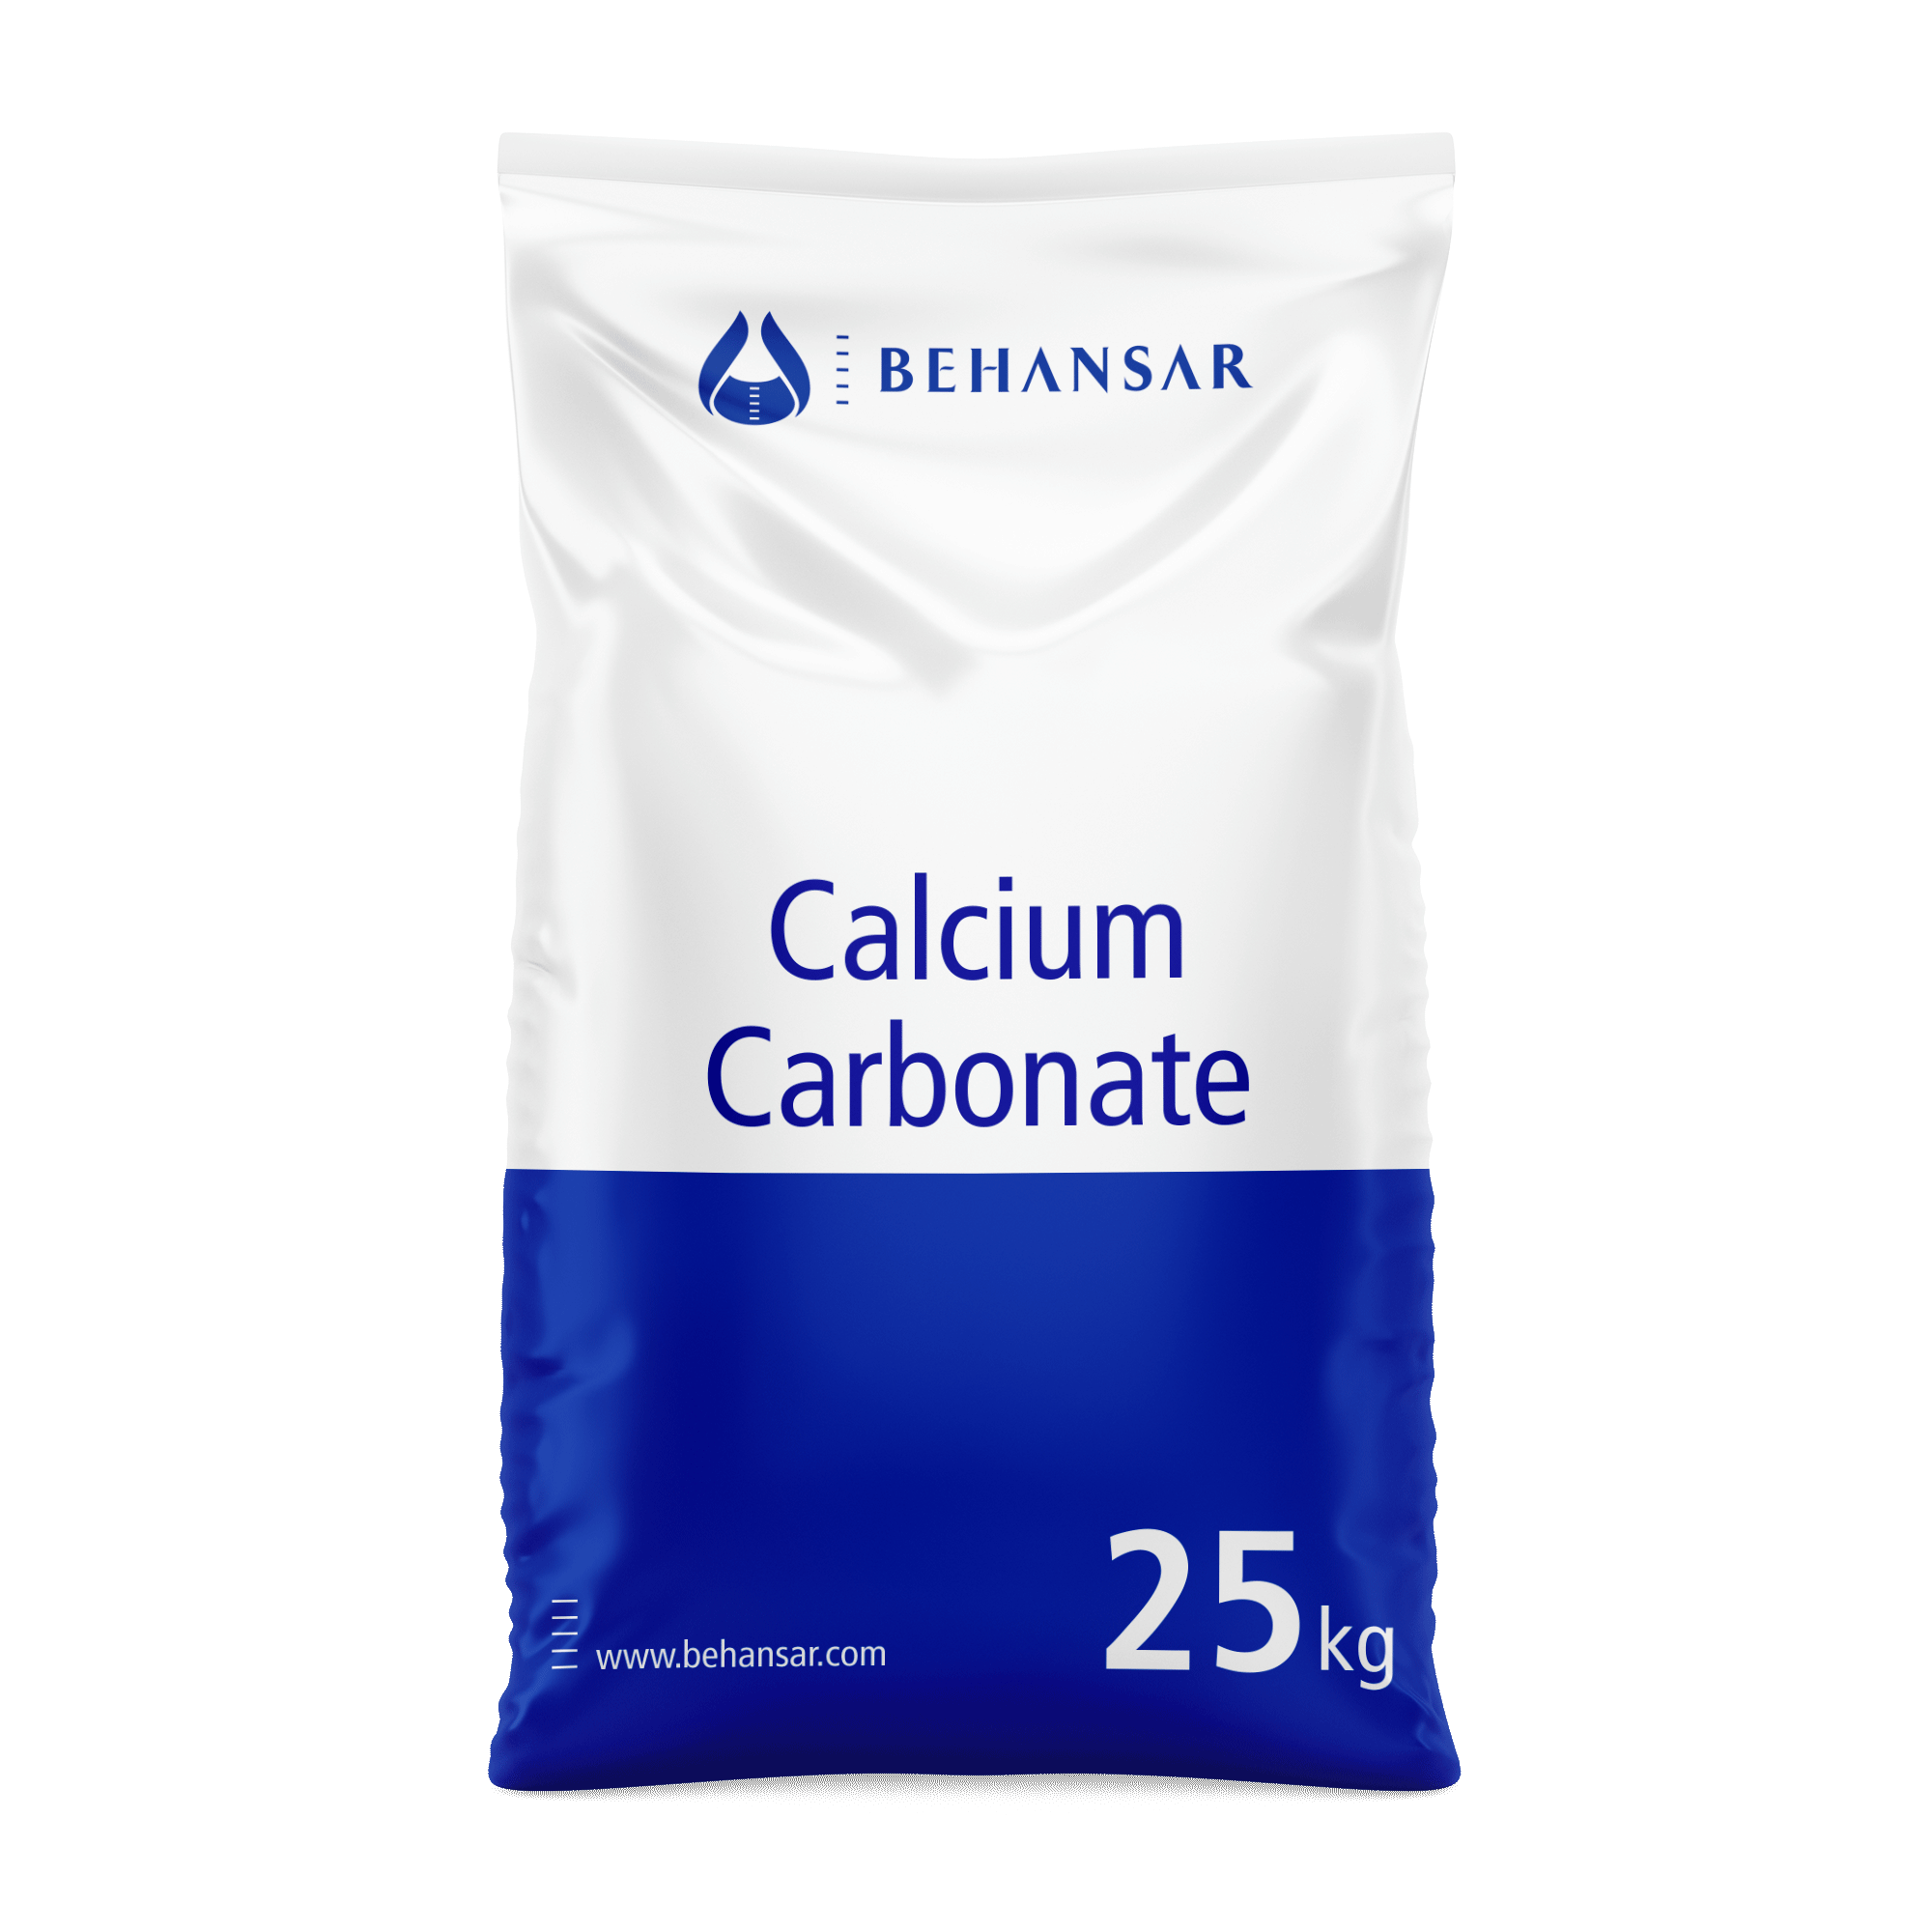 Calcium Carbonate is one of the products of Behansar Co